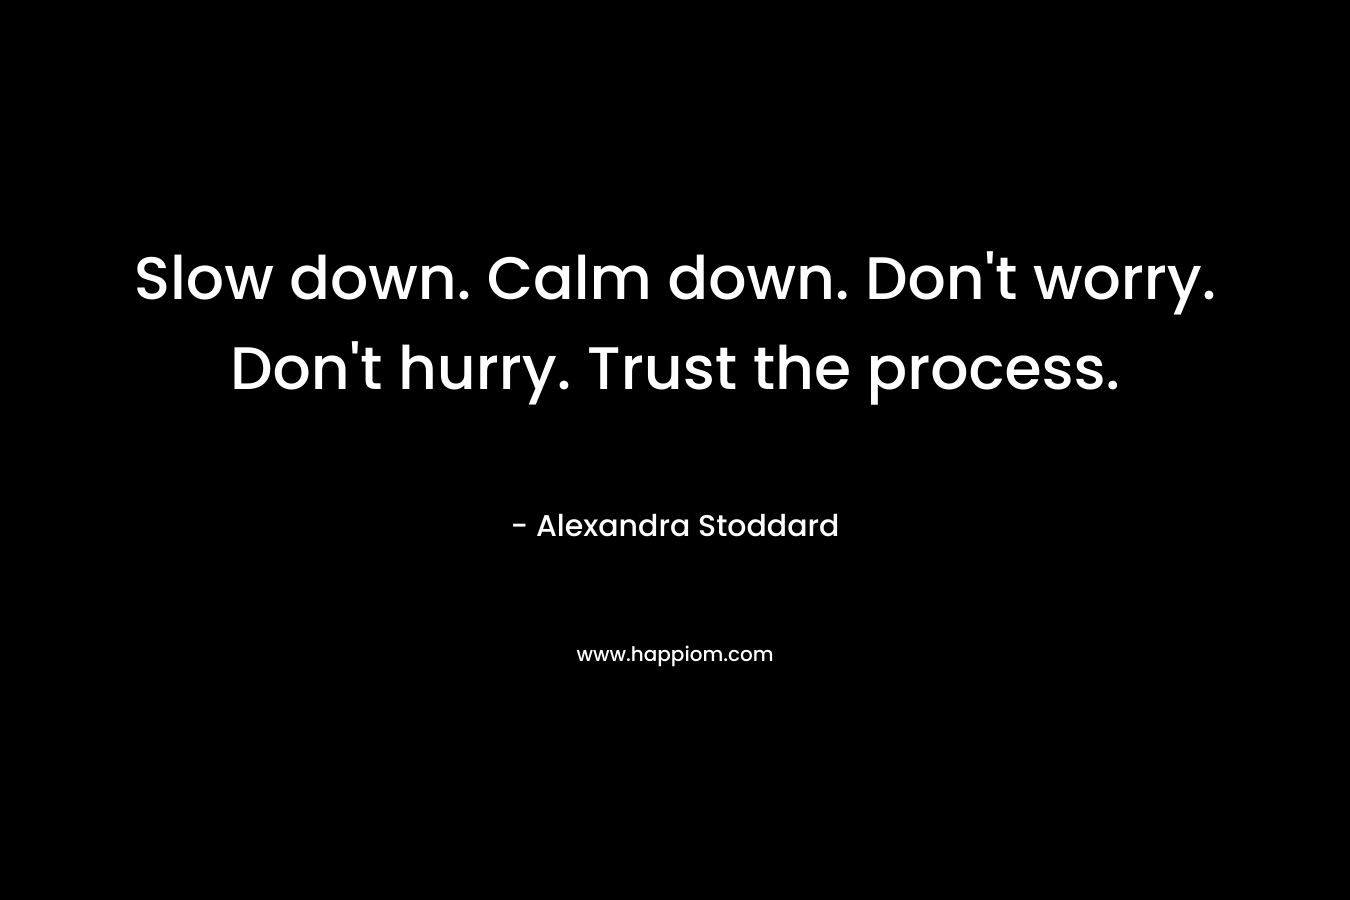 Slow down. Calm down. Don't worry. Don't hurry. Trust the process.